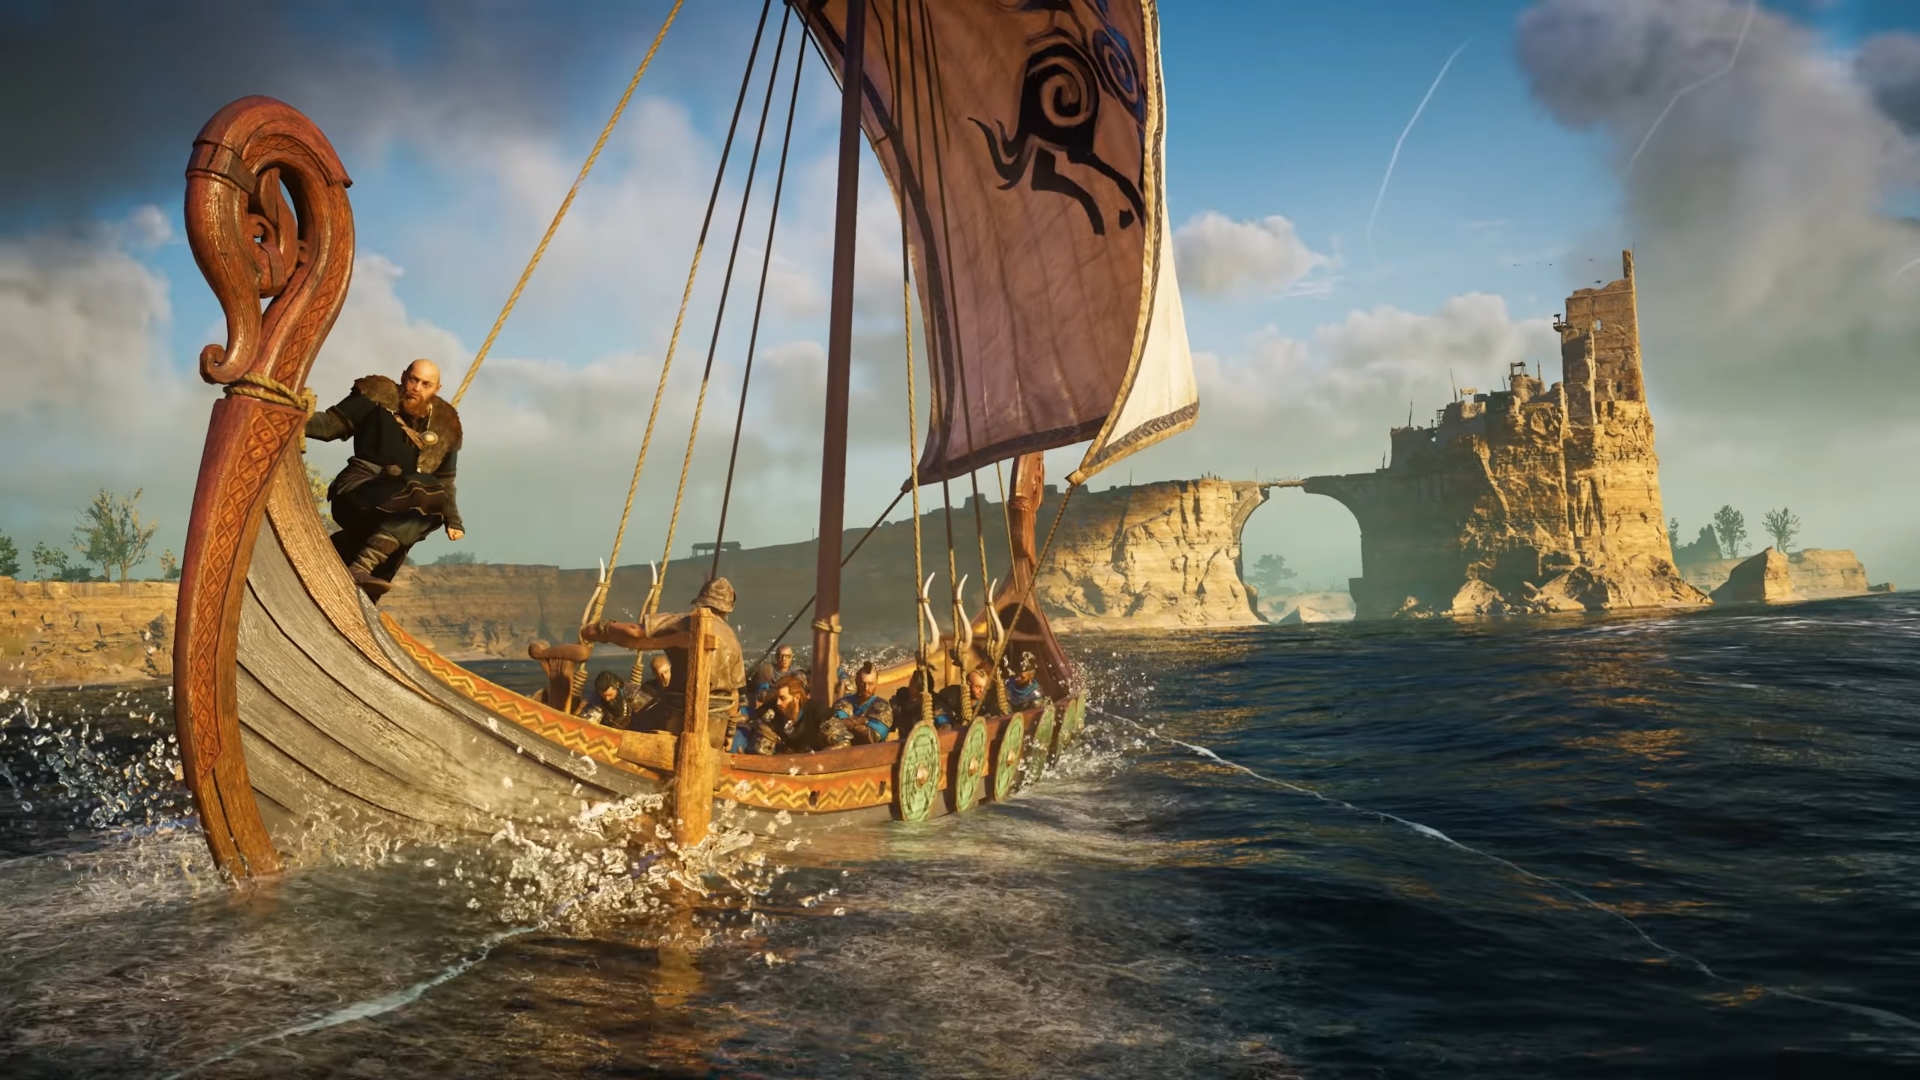 Best educational games: Assassin's Creed Discovery Tours. Image shows a Viking ship sailing on the sea.